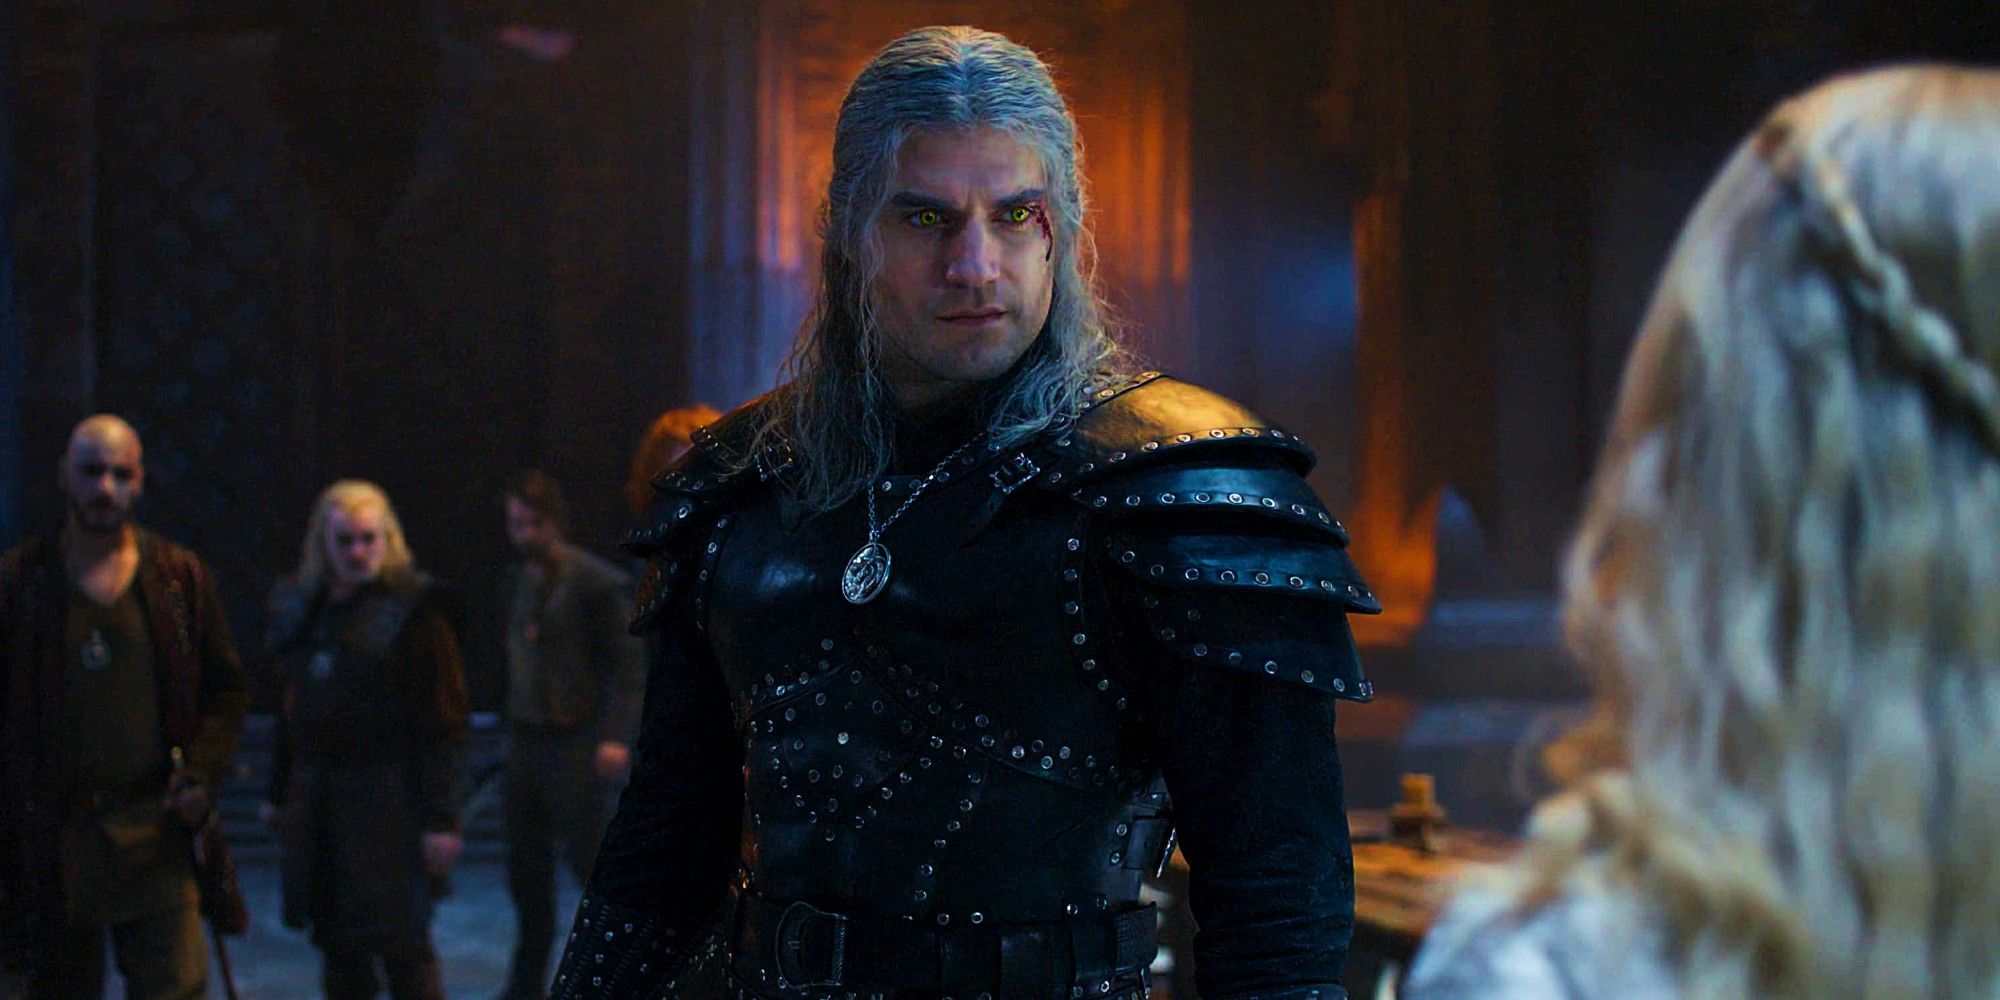 Henry Cavill in The Witcher Season 2 Finale Episode 8